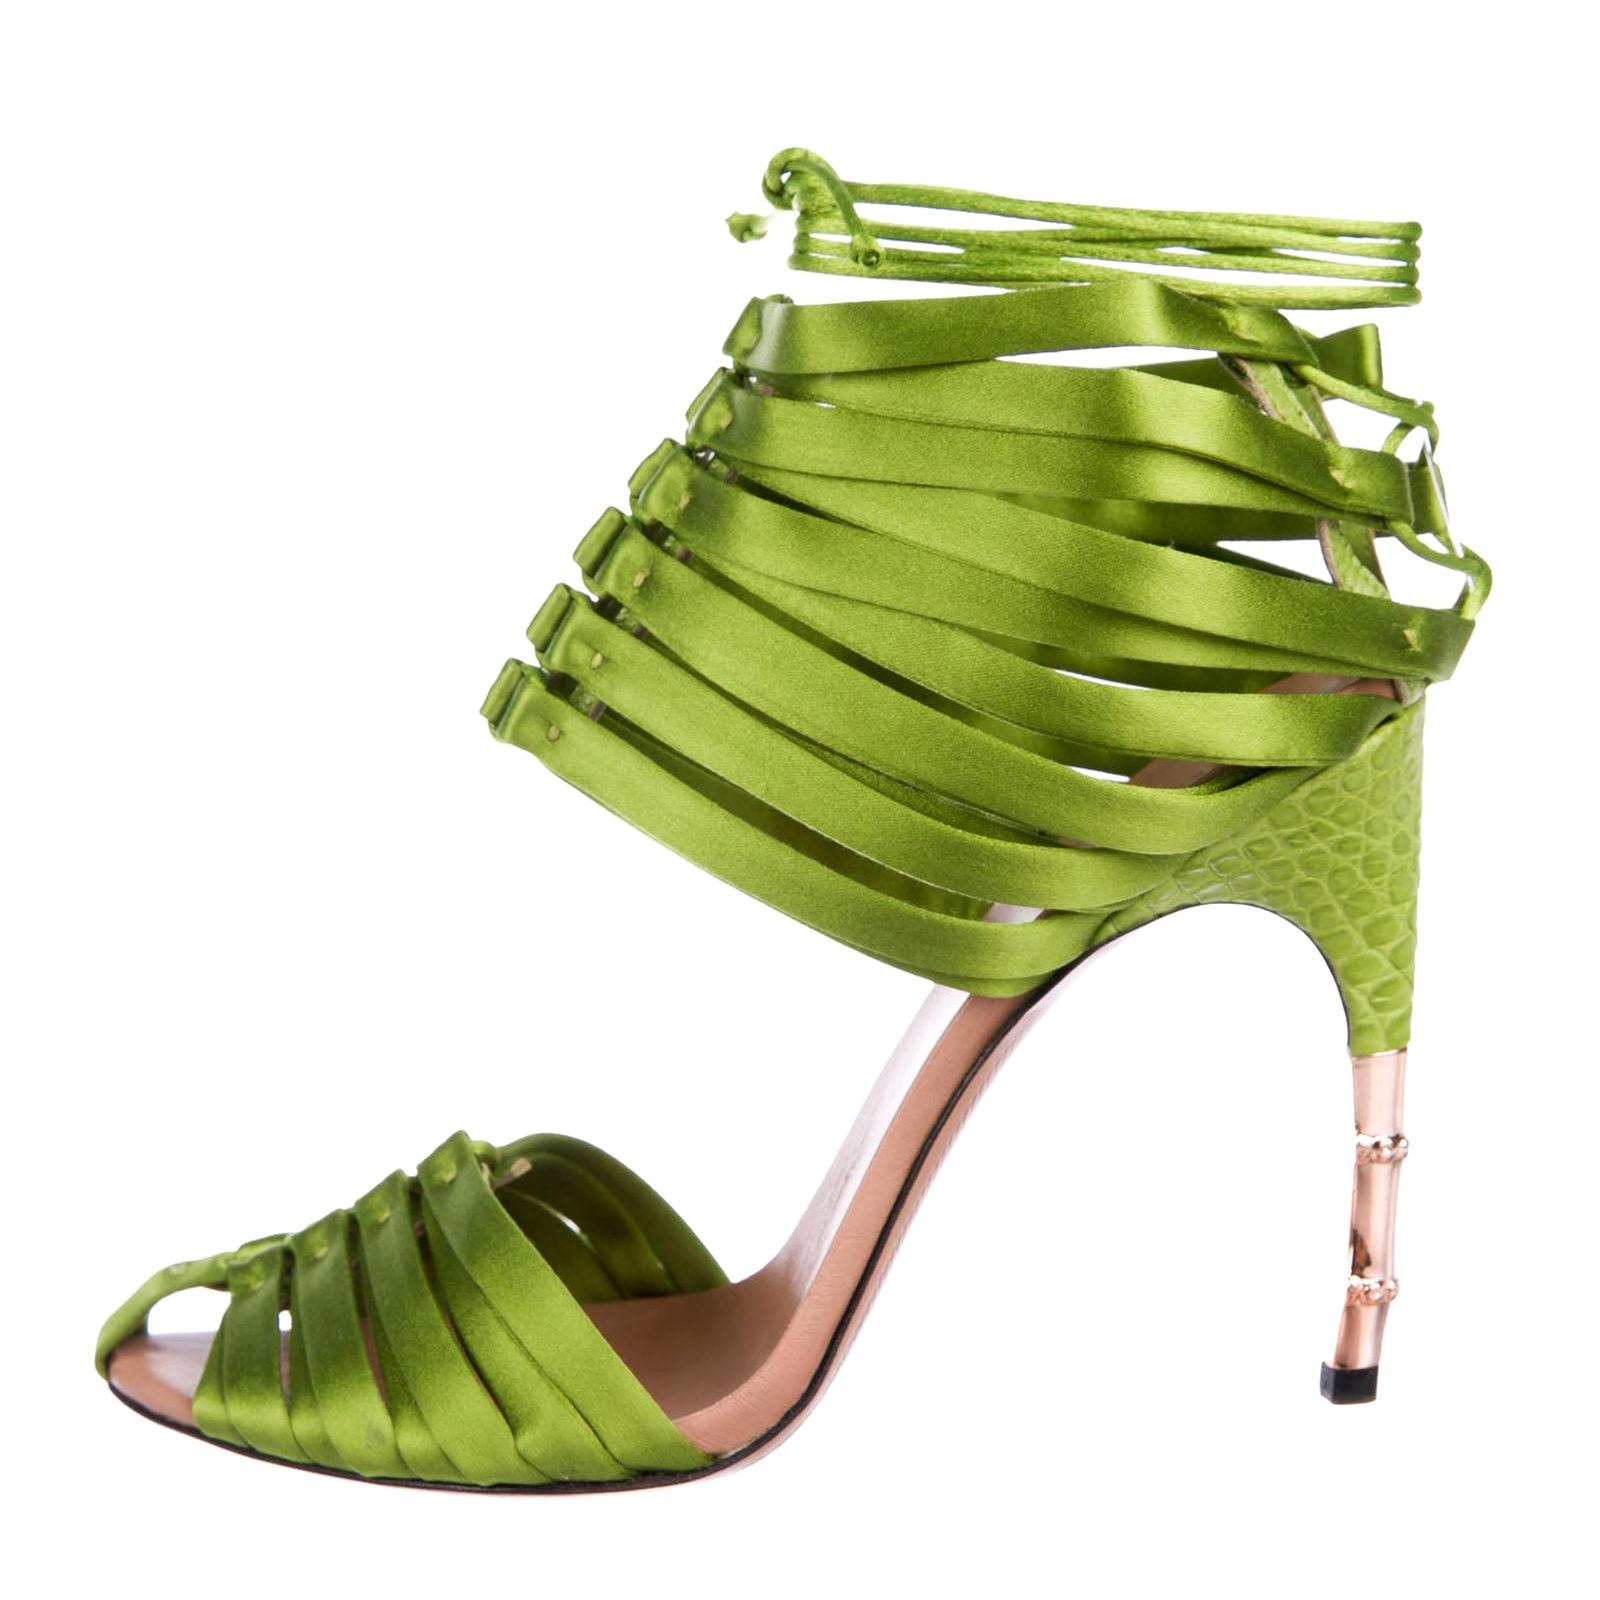 Nouveau TOM FORD for GUCCI S/S 2004 Green Satin Corset Shoes Sandals 9 B